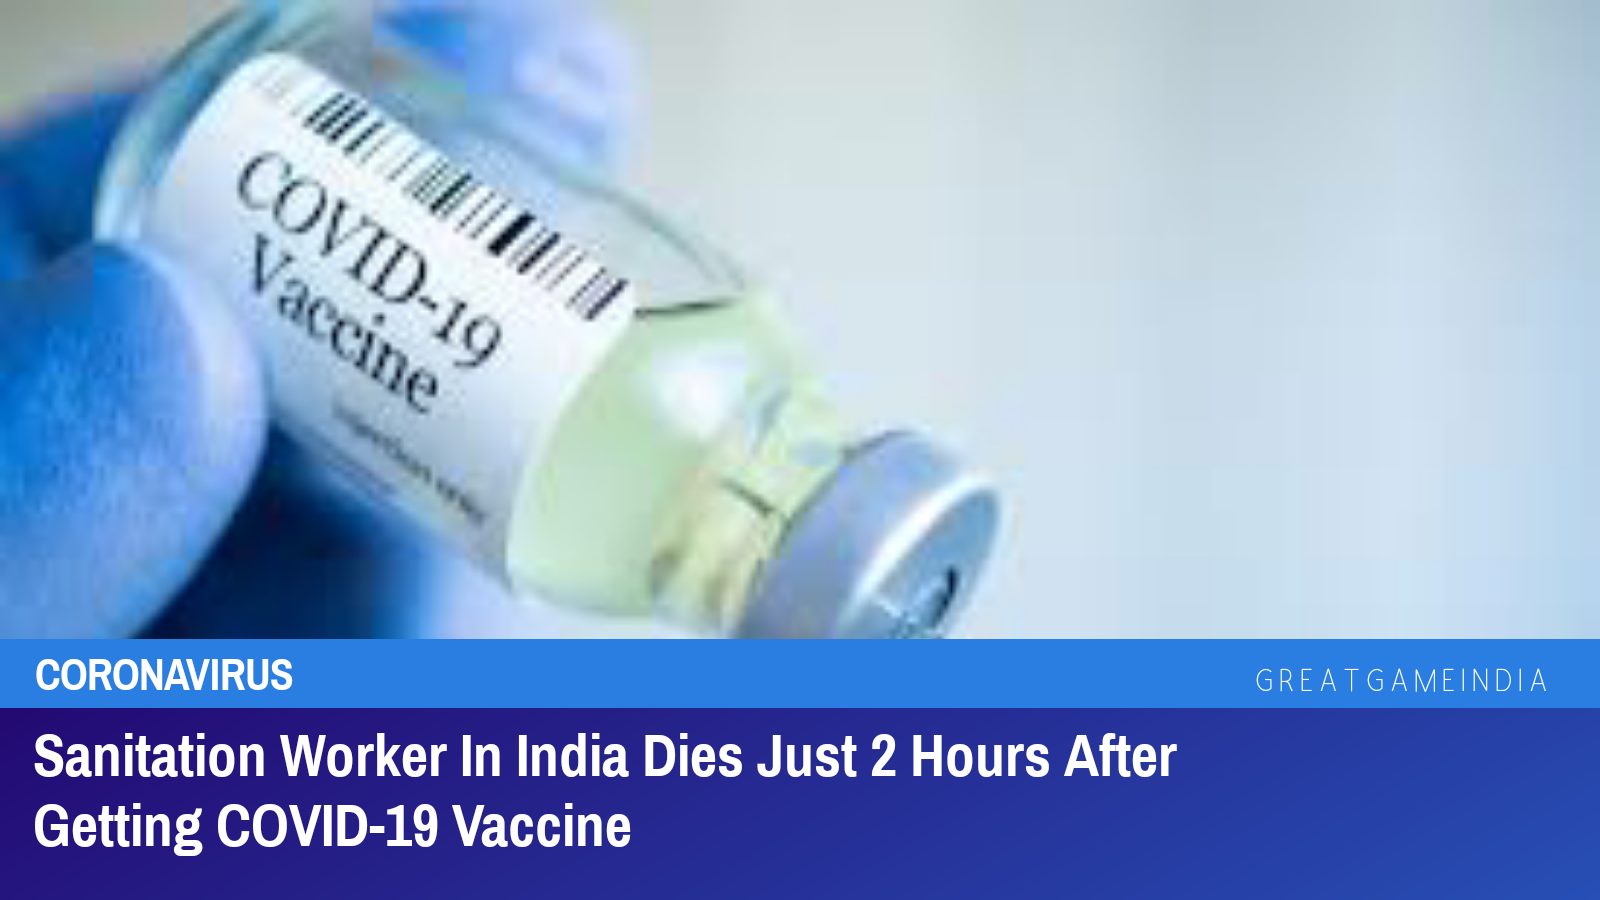 Sanitation Worker In India Dies Just 2 Hours After Getting COVID-19 Vaccine | GreatGameIndia